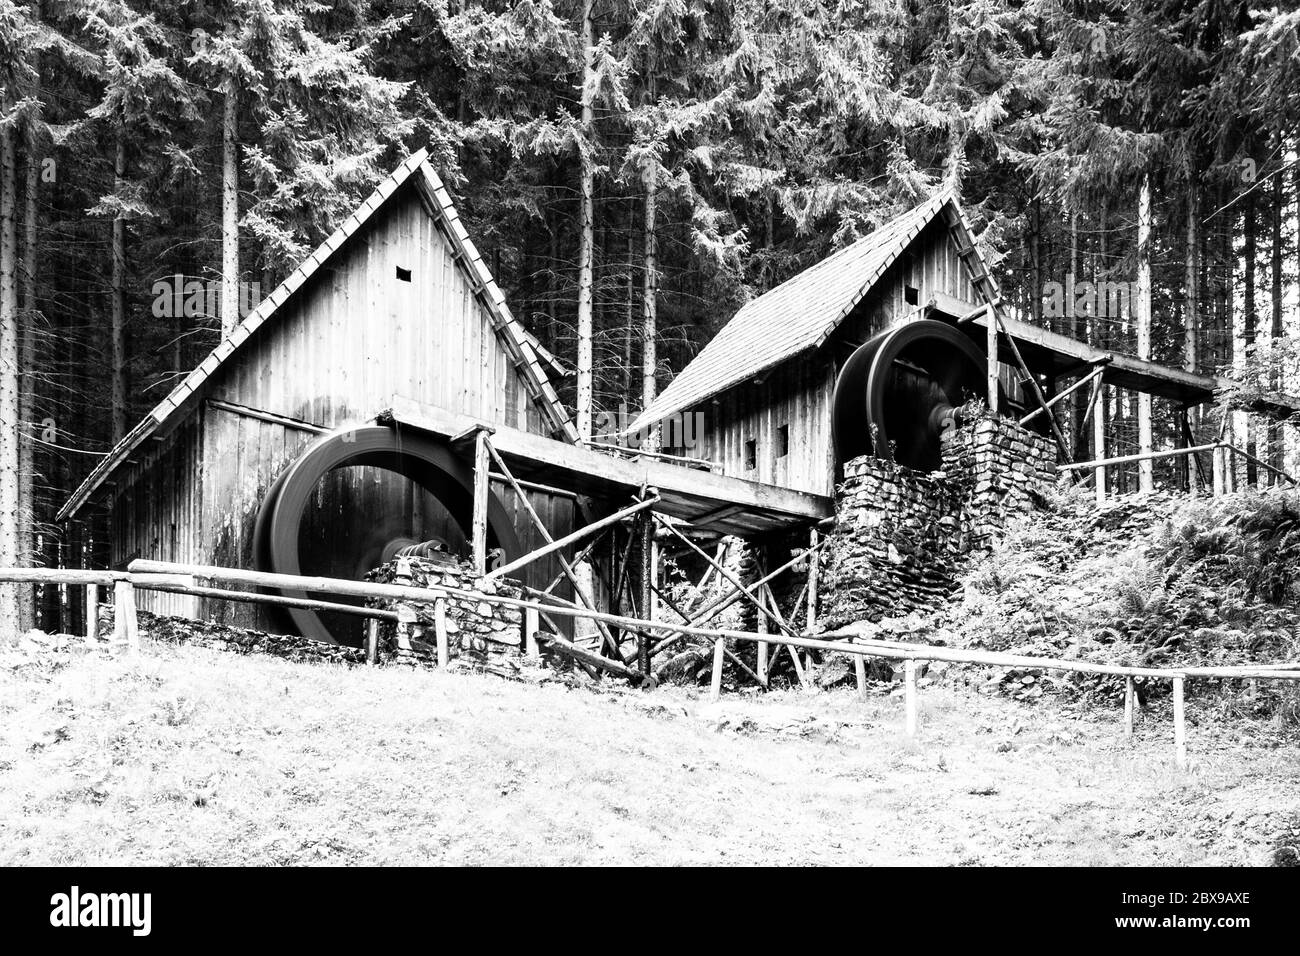 Gold ore mills. Medieval wooden water mills in Zlate Hory, Czech Republic. Black and white image. Stock Photo